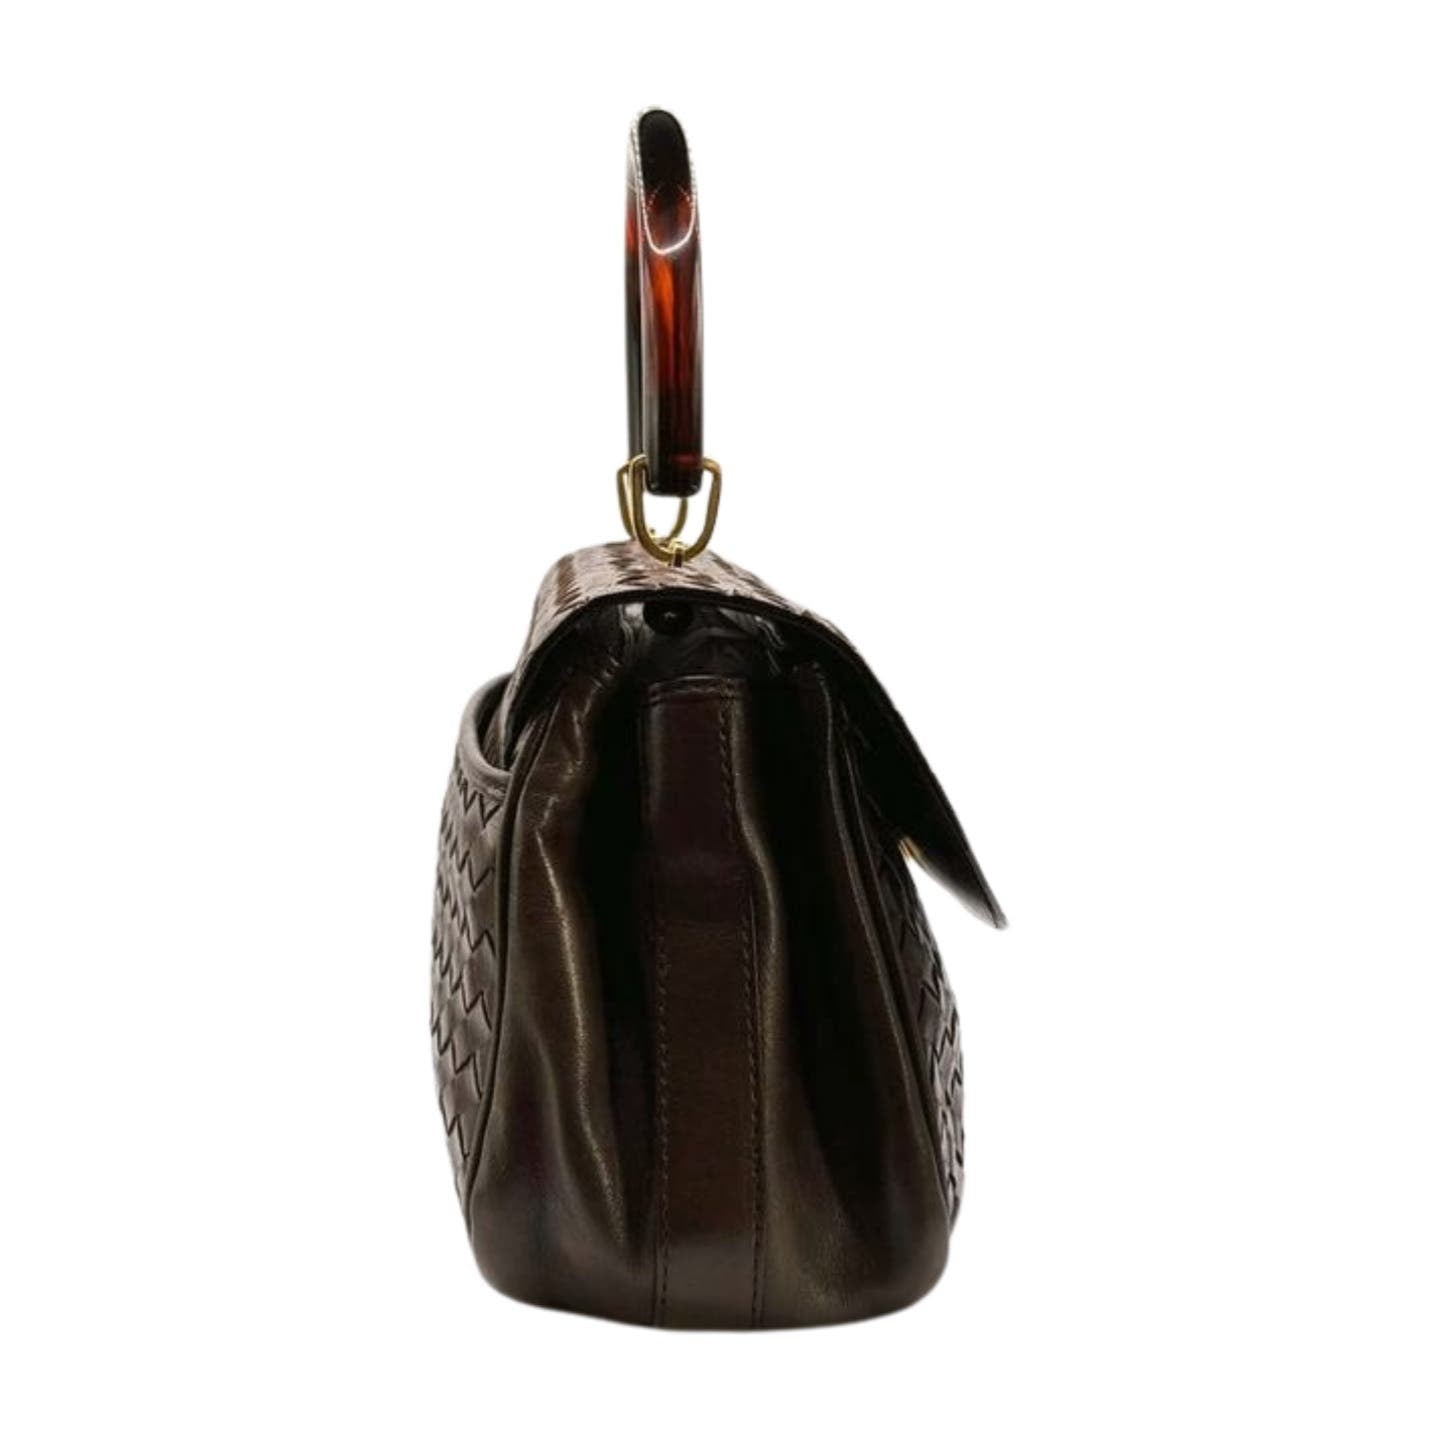 A side view of a dark brown leather handbag featuring Bottega Veneta's signature Intrecciato woven pattern on the exterior. The Bottega Veneta Intrecciato Top Handle Bag, crafted from sumptuous lambskin leather, has a large, sturdy handle attached with gold rings and a flap closure. The handle appears to be of a different material with a marbled, glossy finish.